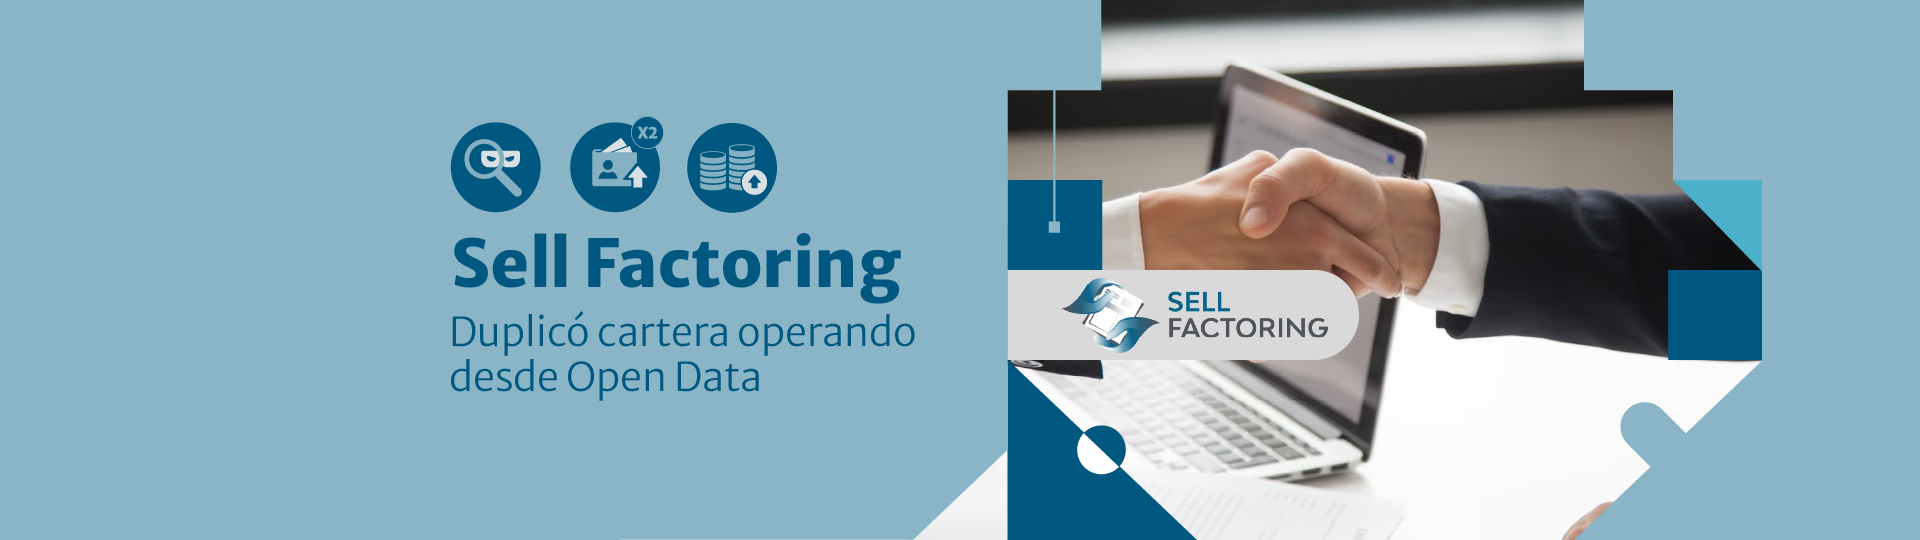 sell facotirng caso exito fapro